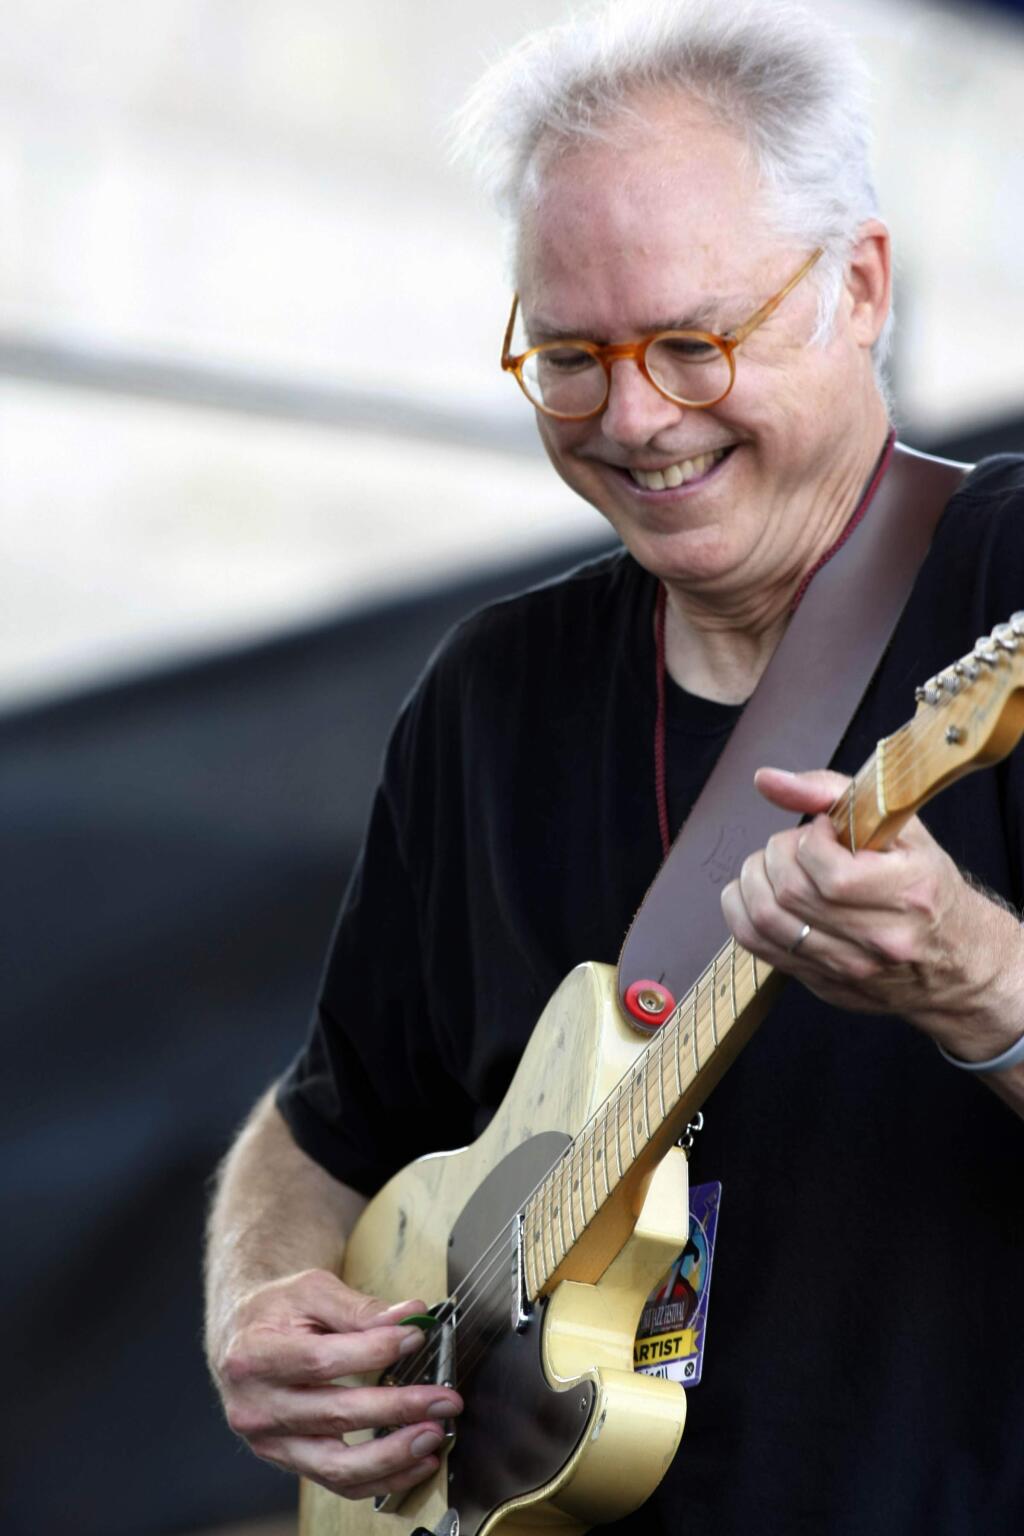 Bill Frisell performs at the Newport Jazz Festival in Newport, R.I. on Saturday, Aug. 4, 2012. (AP Photo/Joe Giblin)